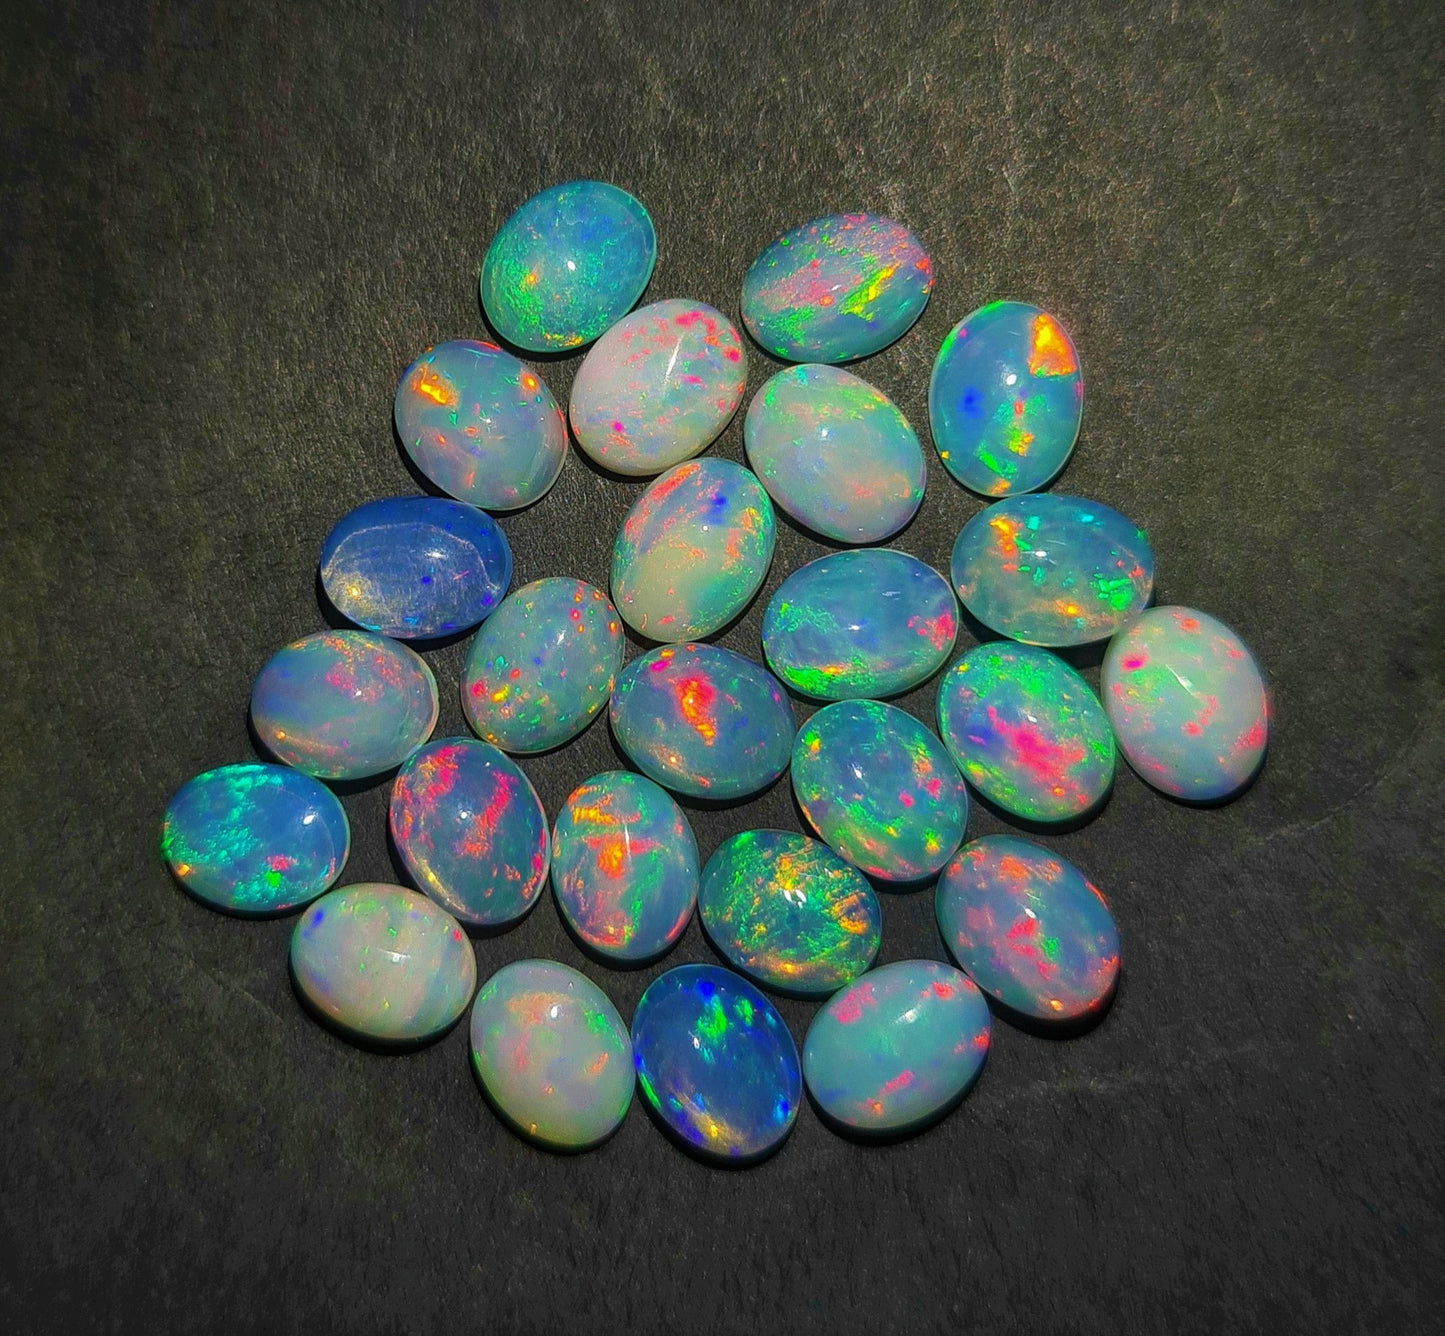 Natural Ethiopian Opal 7x10 mm Oval Gemstone Cabochon, Calibrated Opal Stone, Multi Fire Opal Loose Stone For Jewelry Making. (Natural)